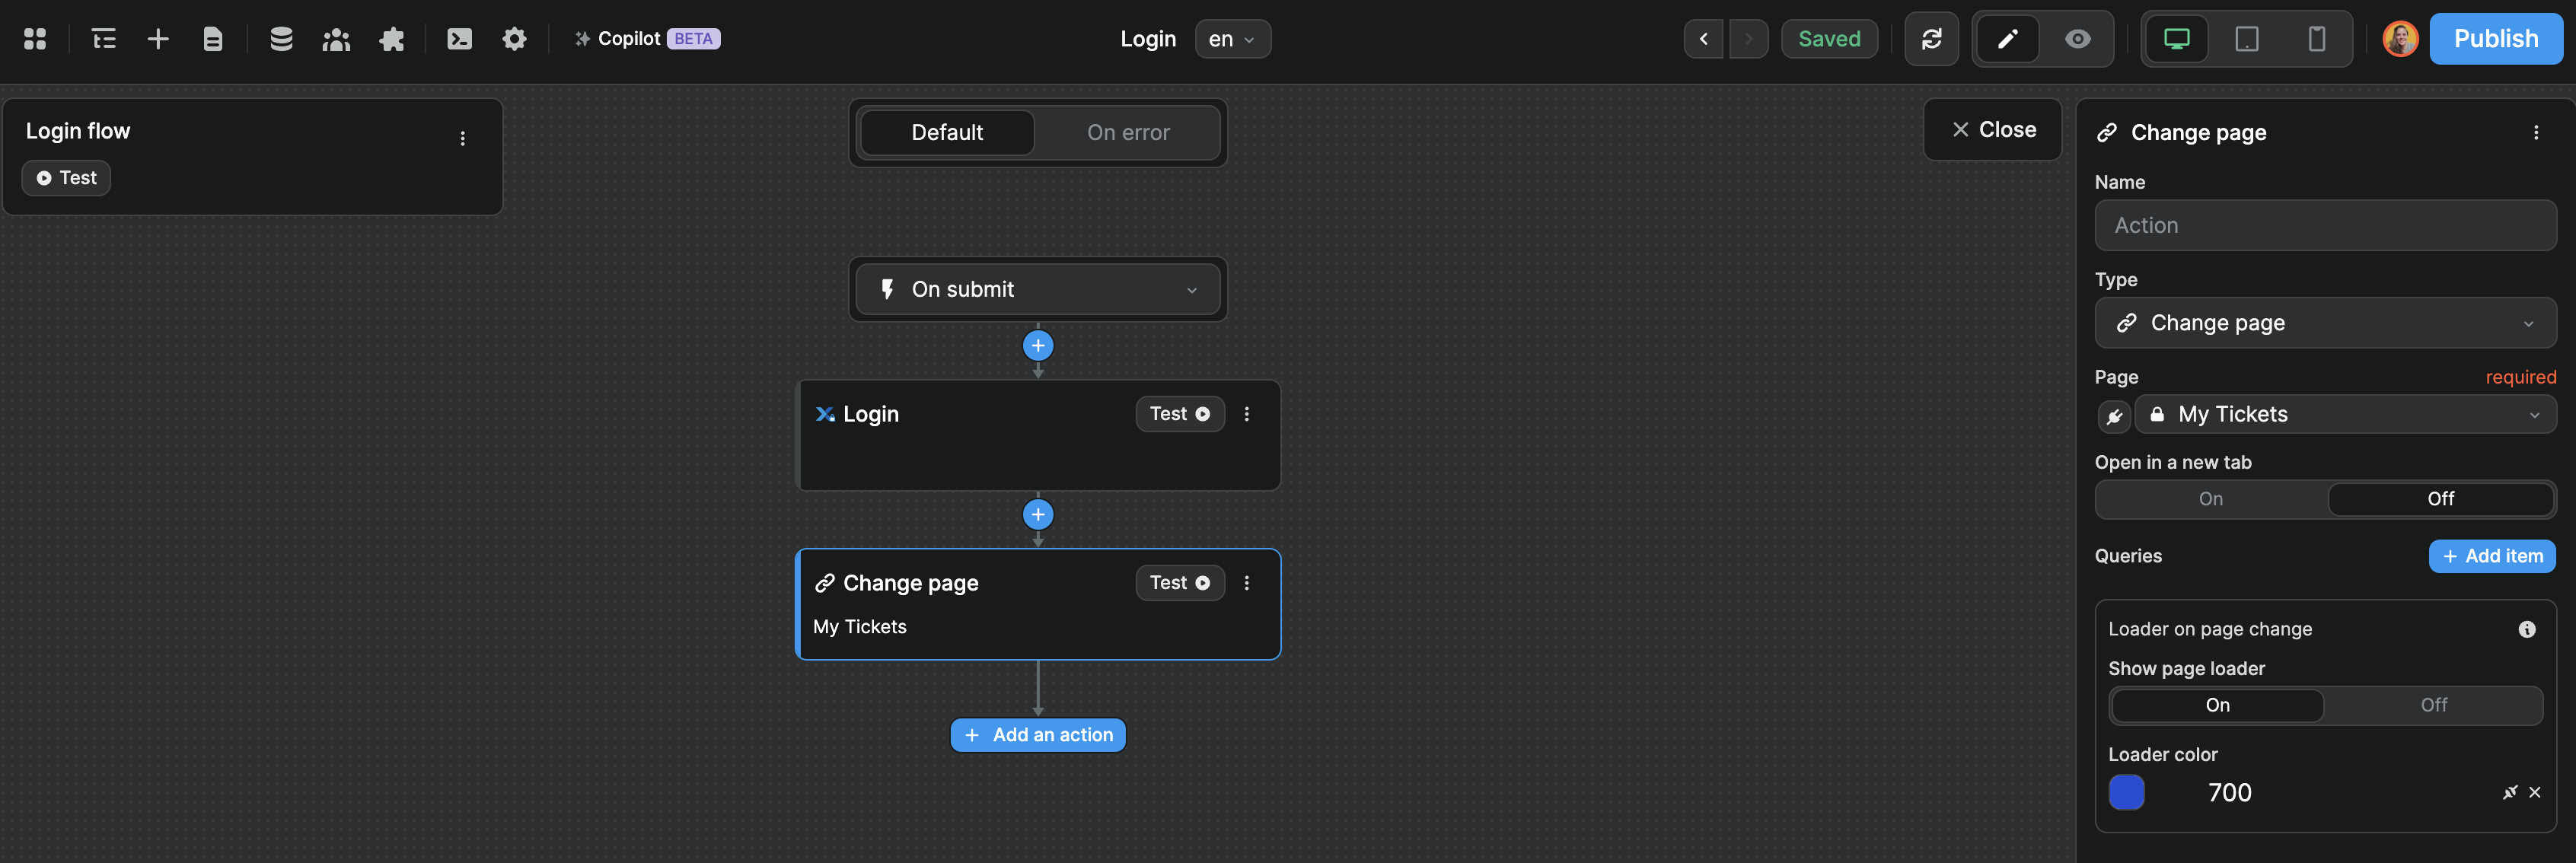 Xano login flow with change page